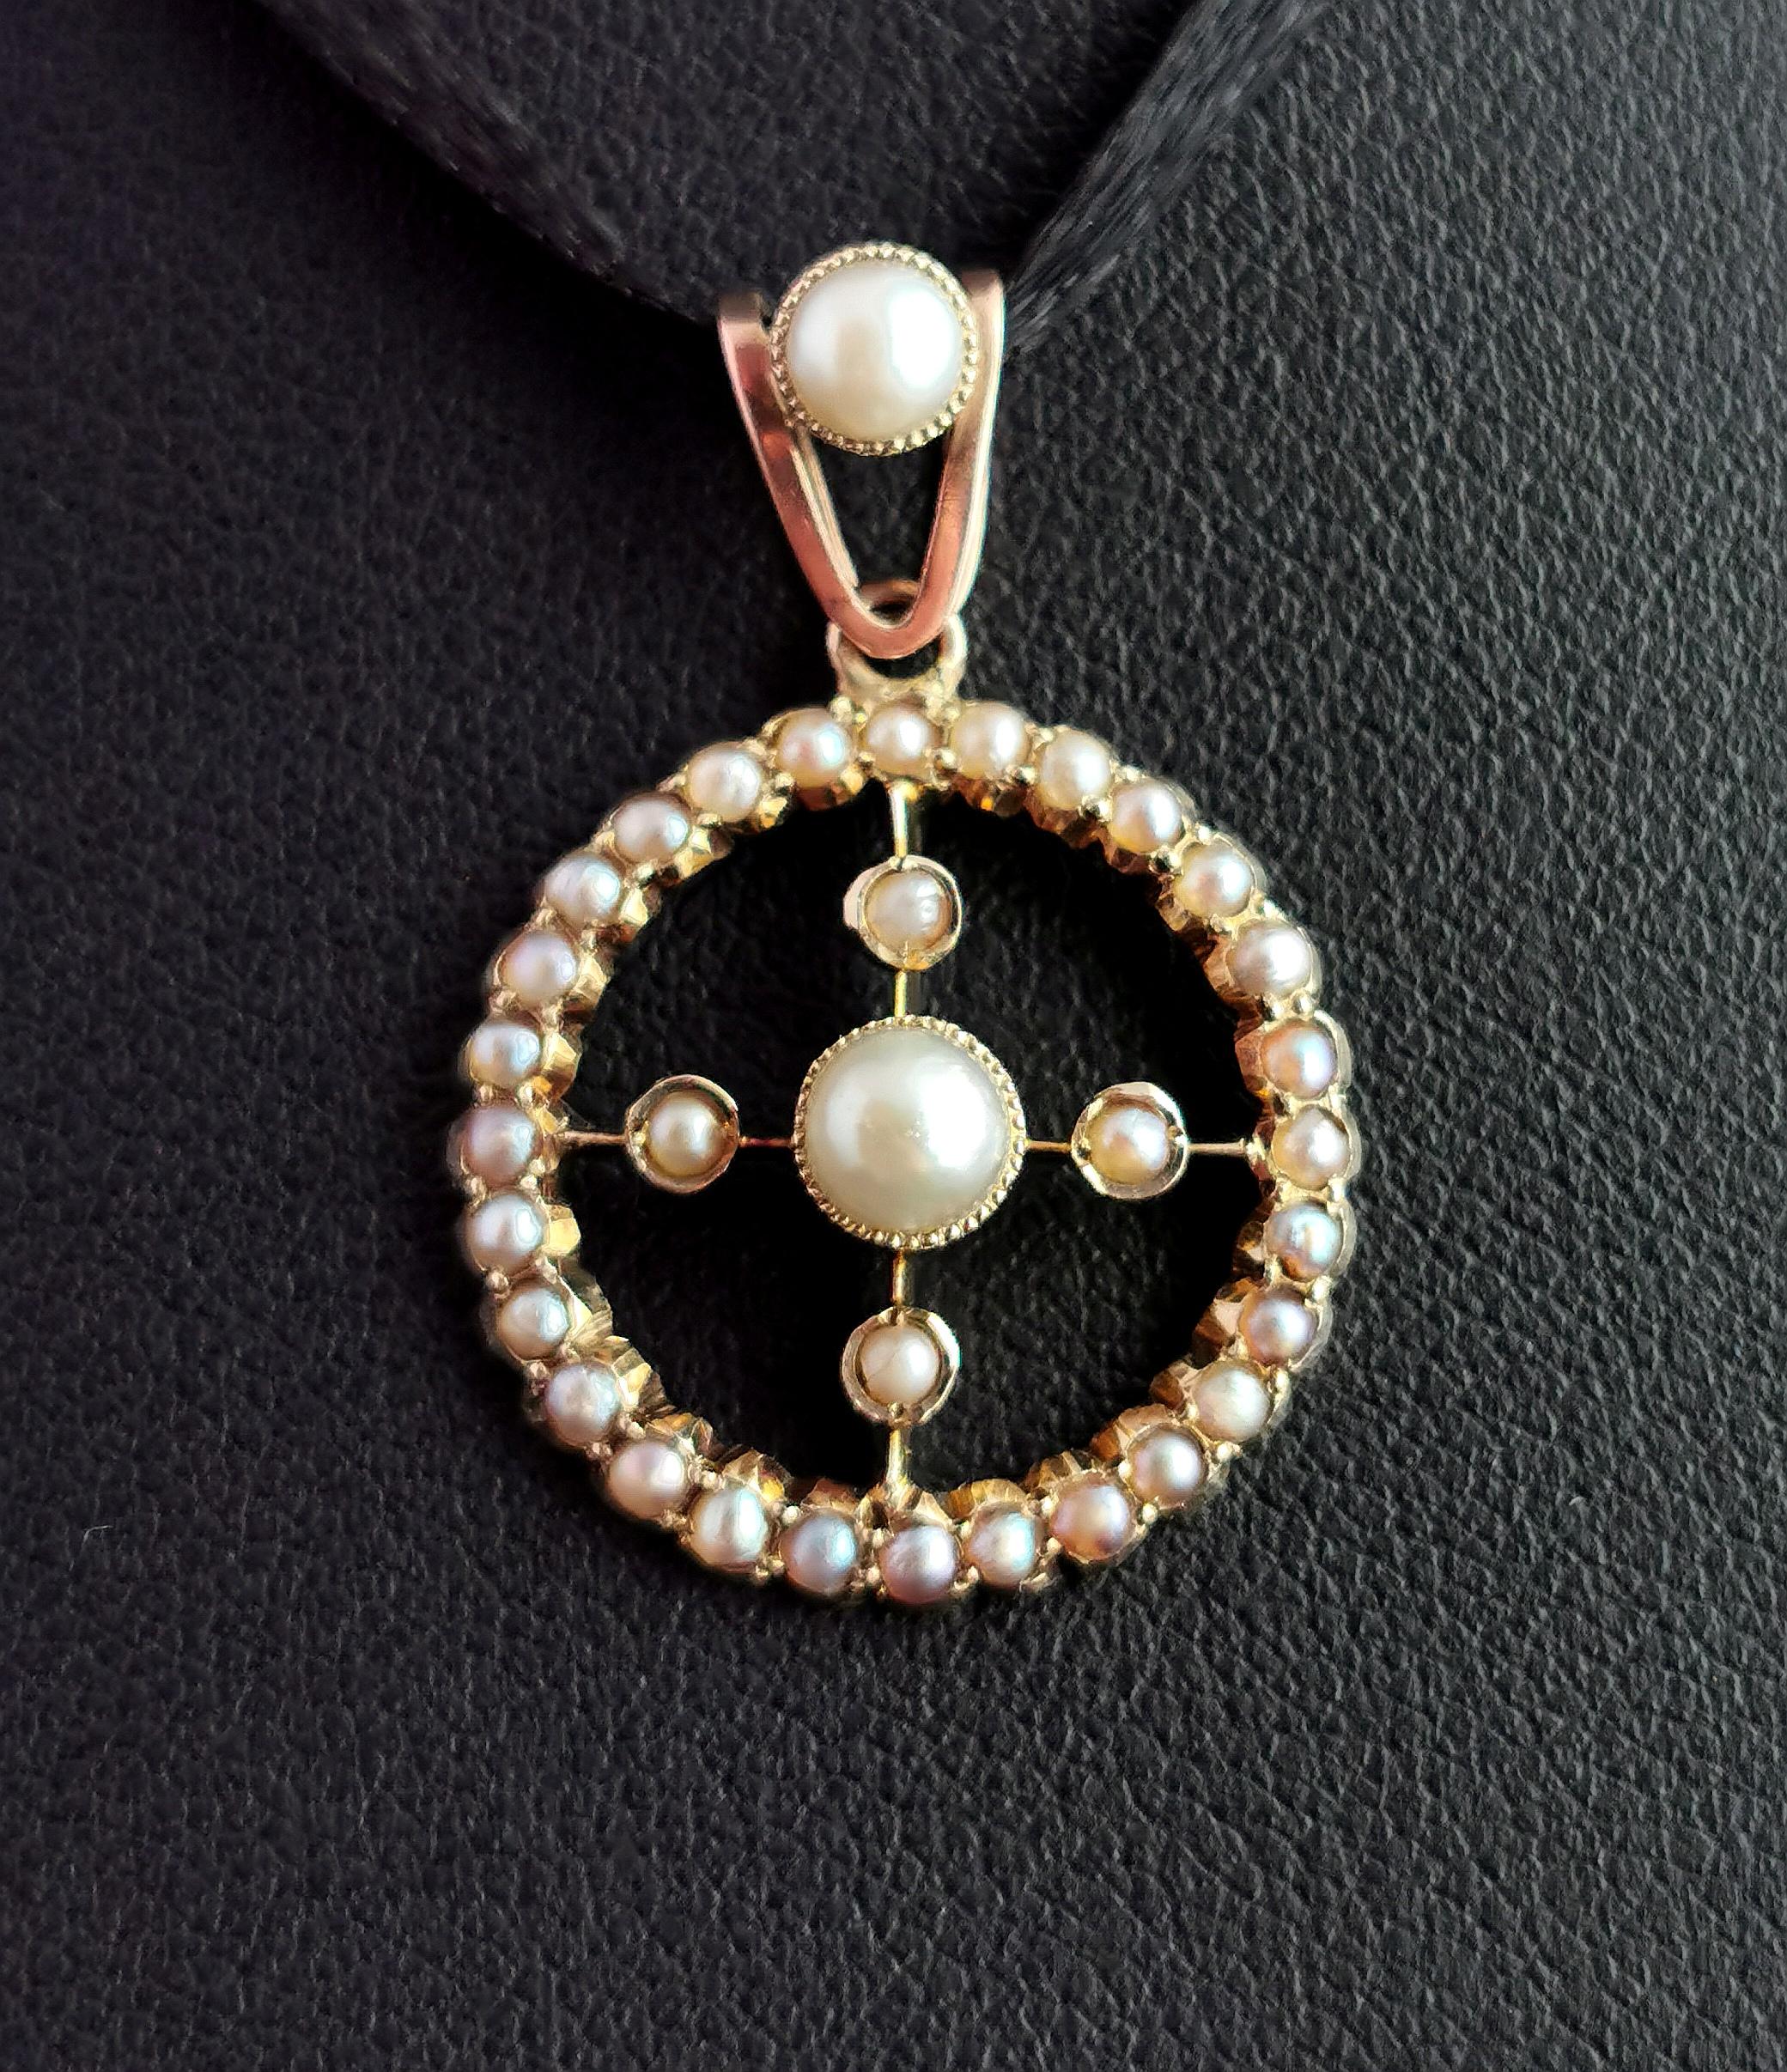 A beautiful and unusual Victorian split pearl and seed pearl pendant.

It is a circular shaped pendant with a gold cross running through the centre set with a large split pearl with four on each of the bars.

The outer circle is set with a halo of